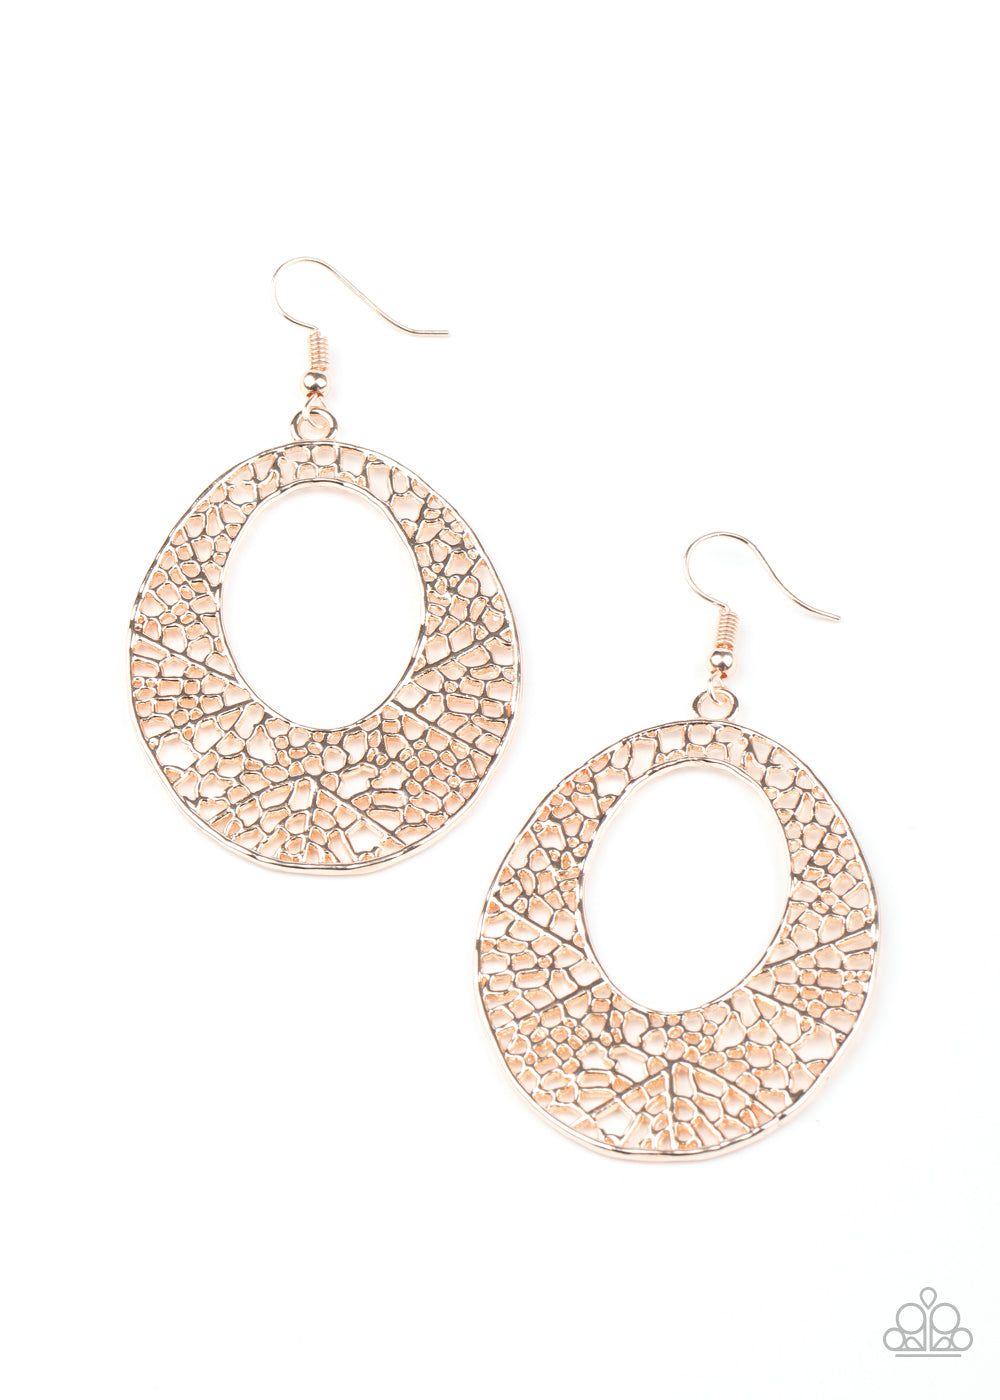 &lt;P&gt;Featuring a shattered metallic pattern, glistening rose gold filigree coalesces into an airy oval frame for a classic look. Earring attaches to a standard fishhook fitting.
&lt;/P&gt;  

&lt;P&gt; &lt;I&gt;  Sold as one pair of earrings. &lt;/I&gt;  &lt;/P&gt;


&lt;img src=\&quot;https://d9b54x484lq62.cloudfront.net/paparazzi/shopping/images/517_tag150x115_1.png\&quot; alt=\&quot;New Kit\&quot; align=\&quot;middle\&quot; height=\&quot;50\&quot; width=\&quot;50\&quot;/&gt;